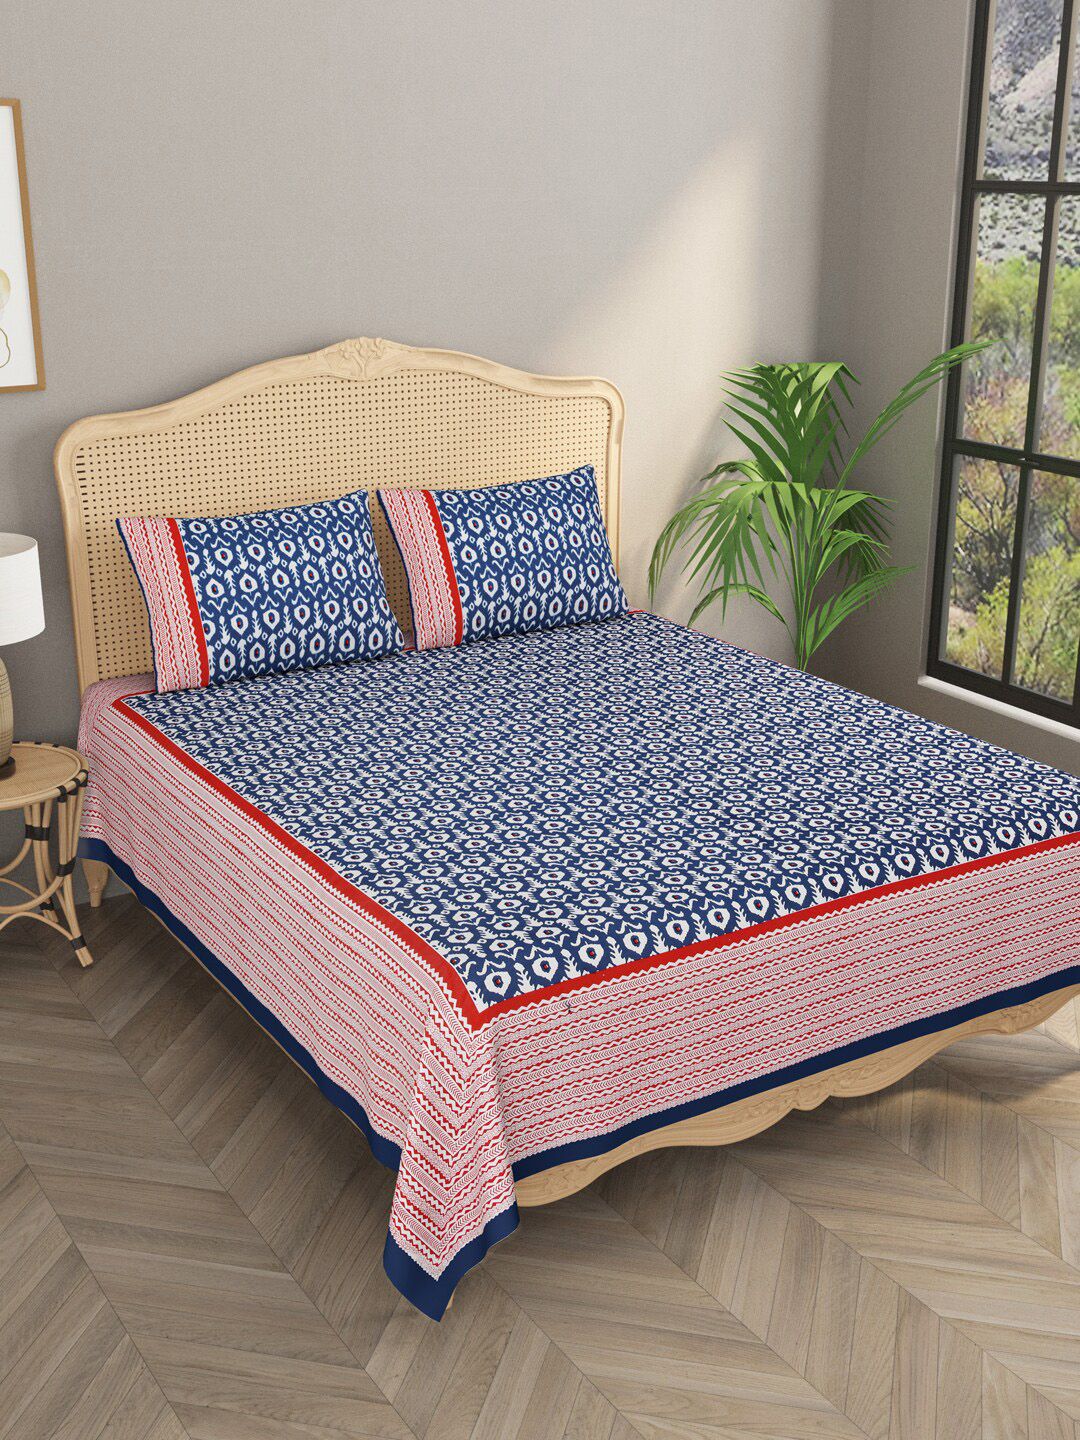 Gulaab Jaipur Blue & Red 600 TC Ikat Printed Cotton King Bedsheet with 2 Pillow Covers Price in India